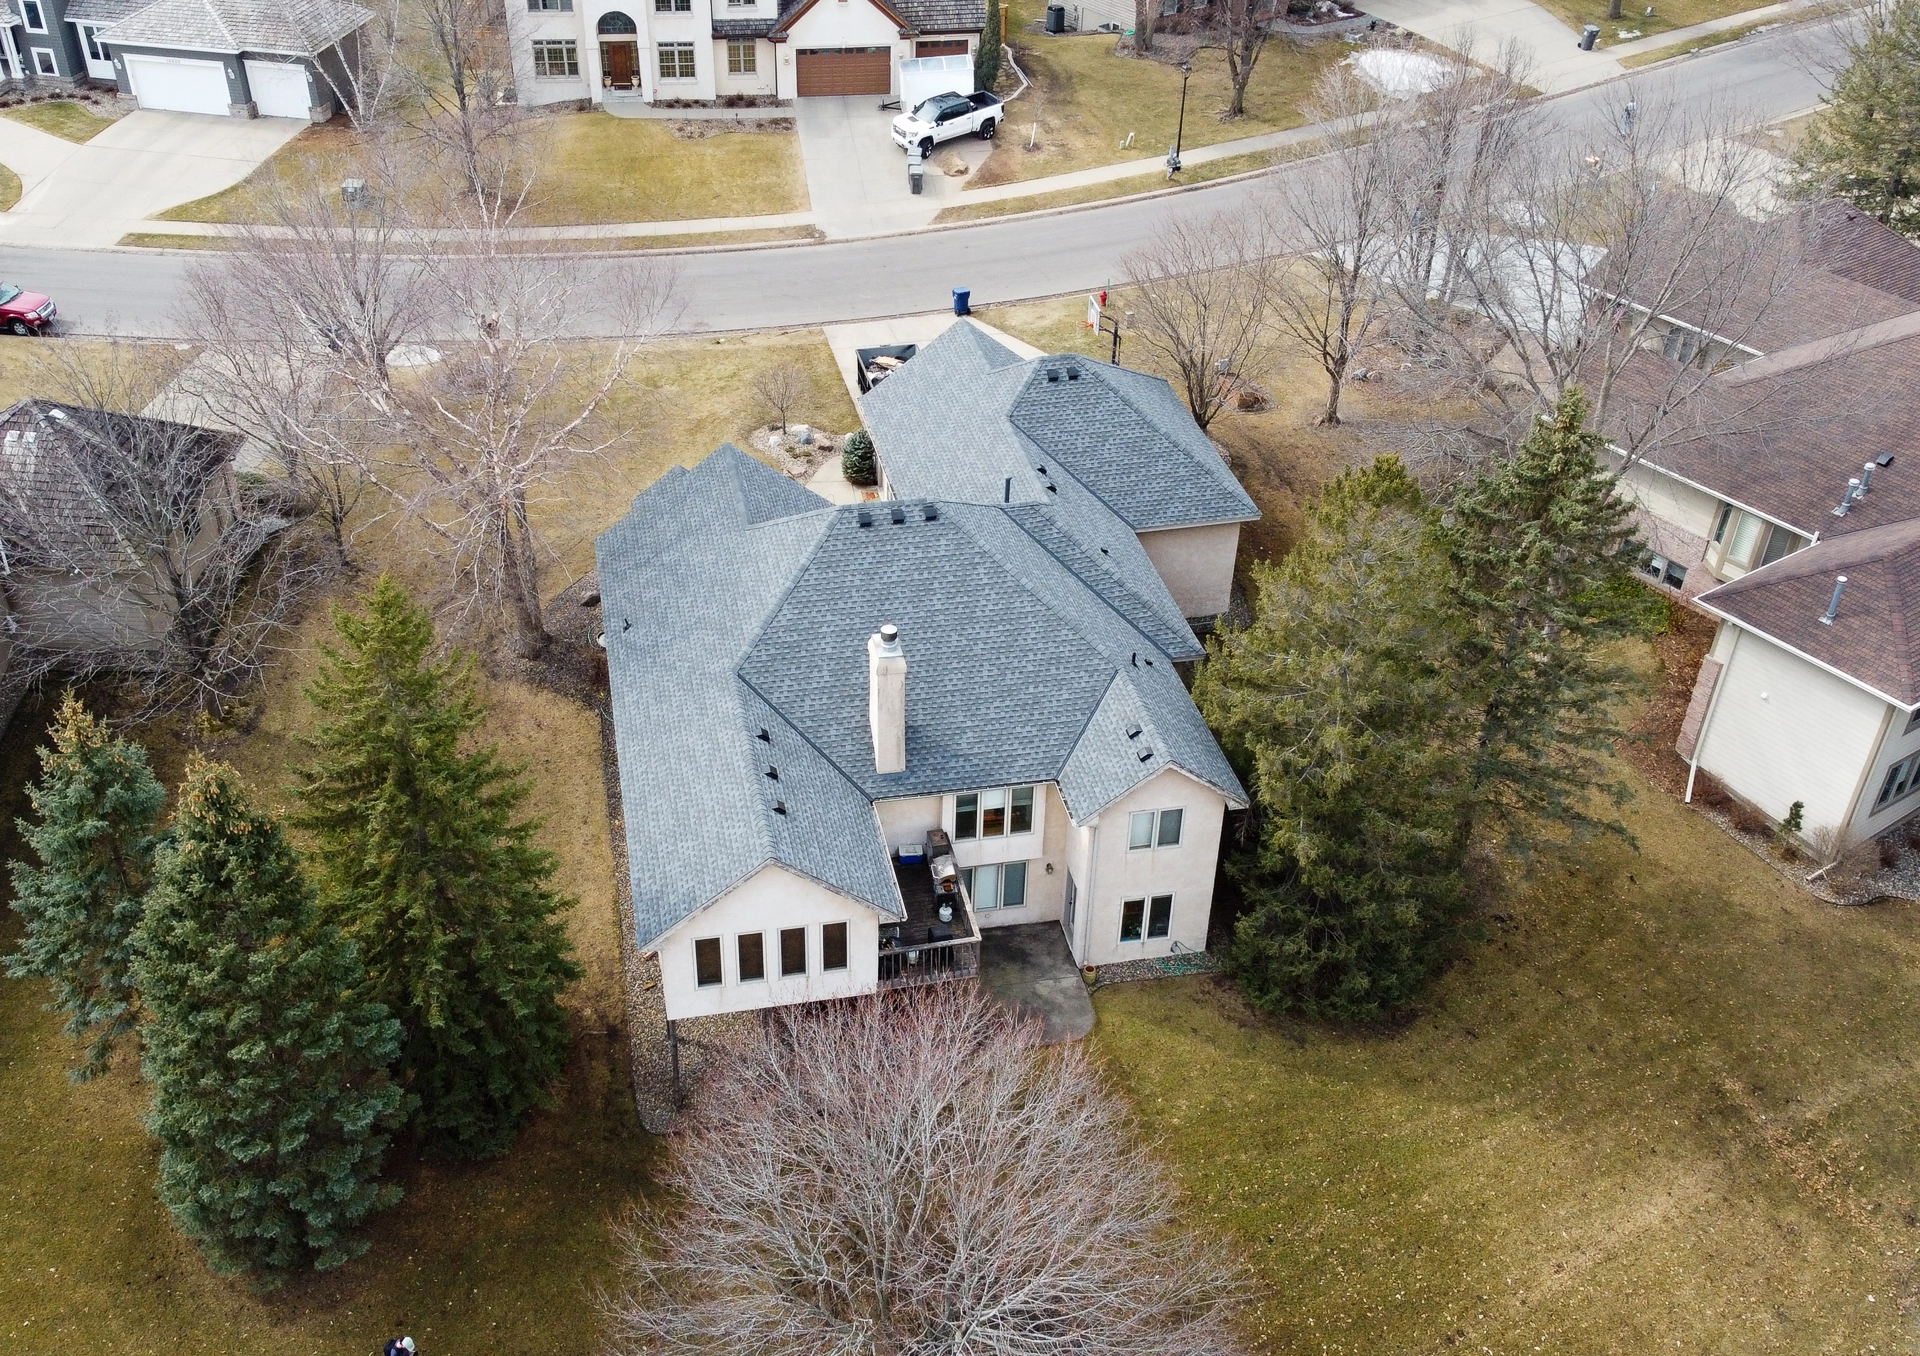 drone view on a home with asphalt shingles that have been replaced